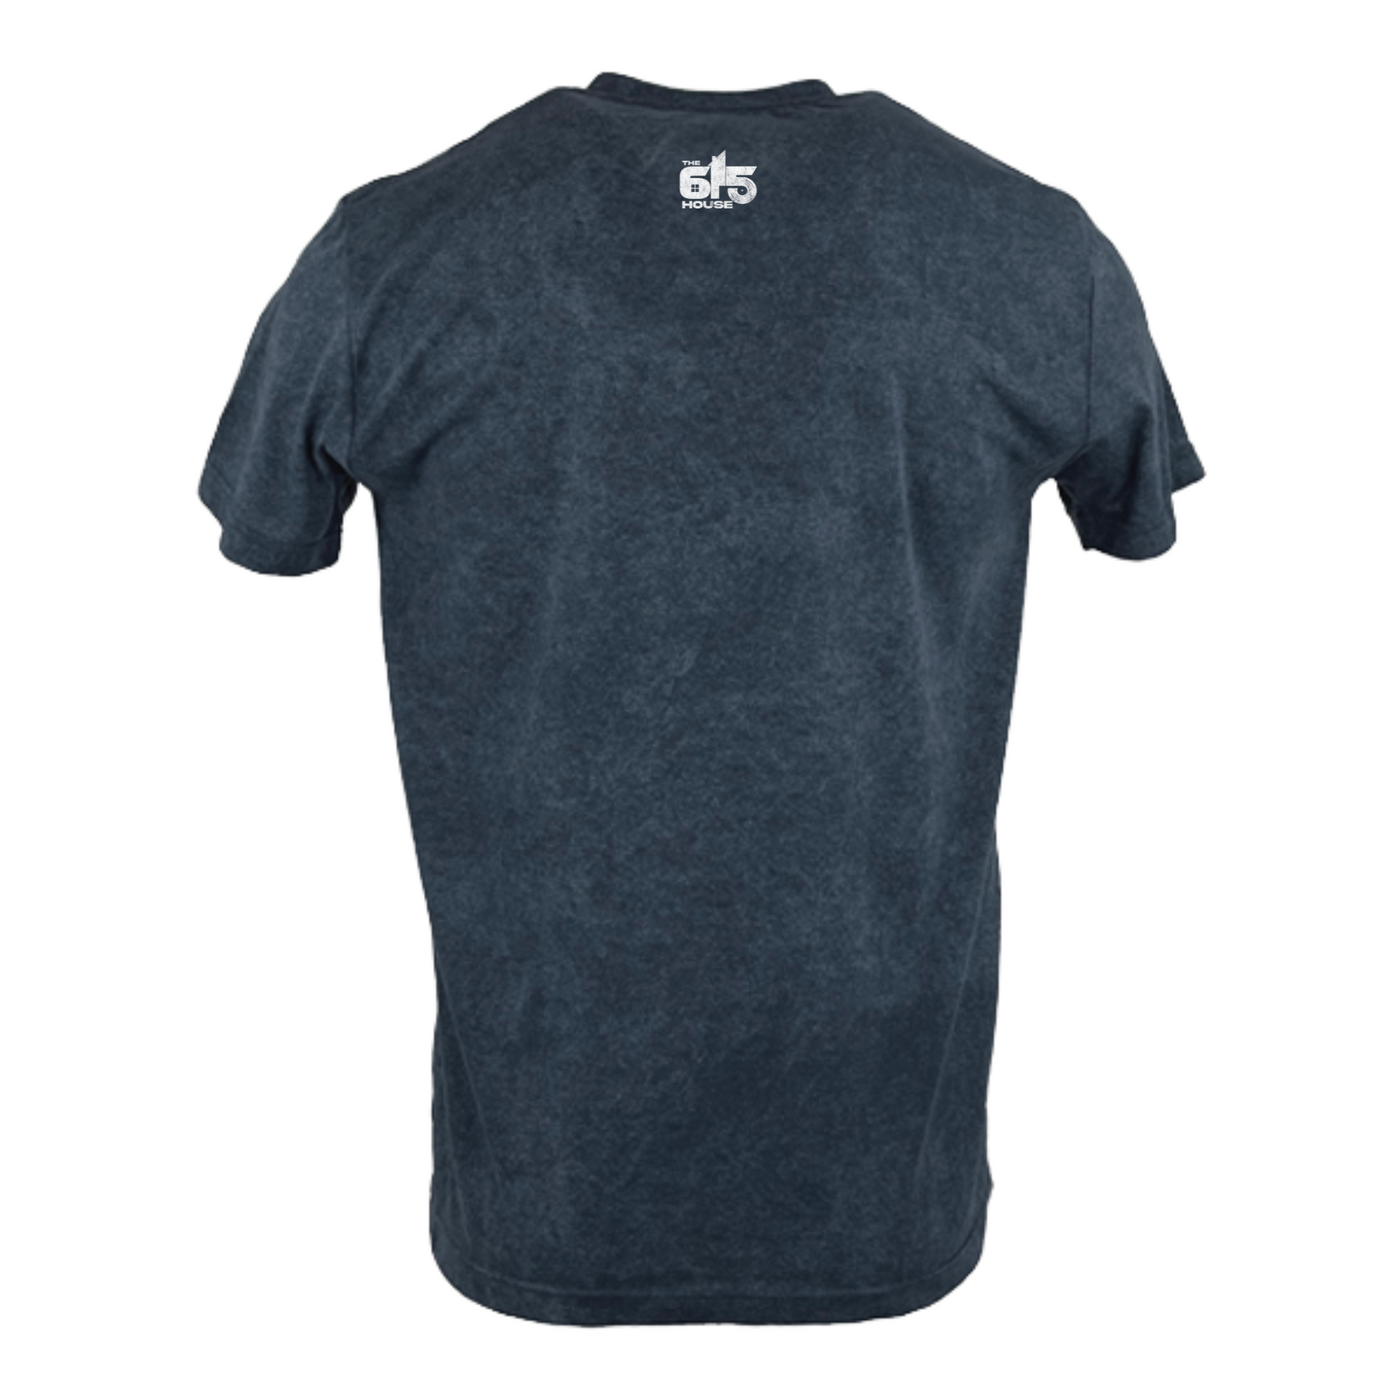 THE 615 HOUSE - Support Original Music T-Shirt: Vintage Navy